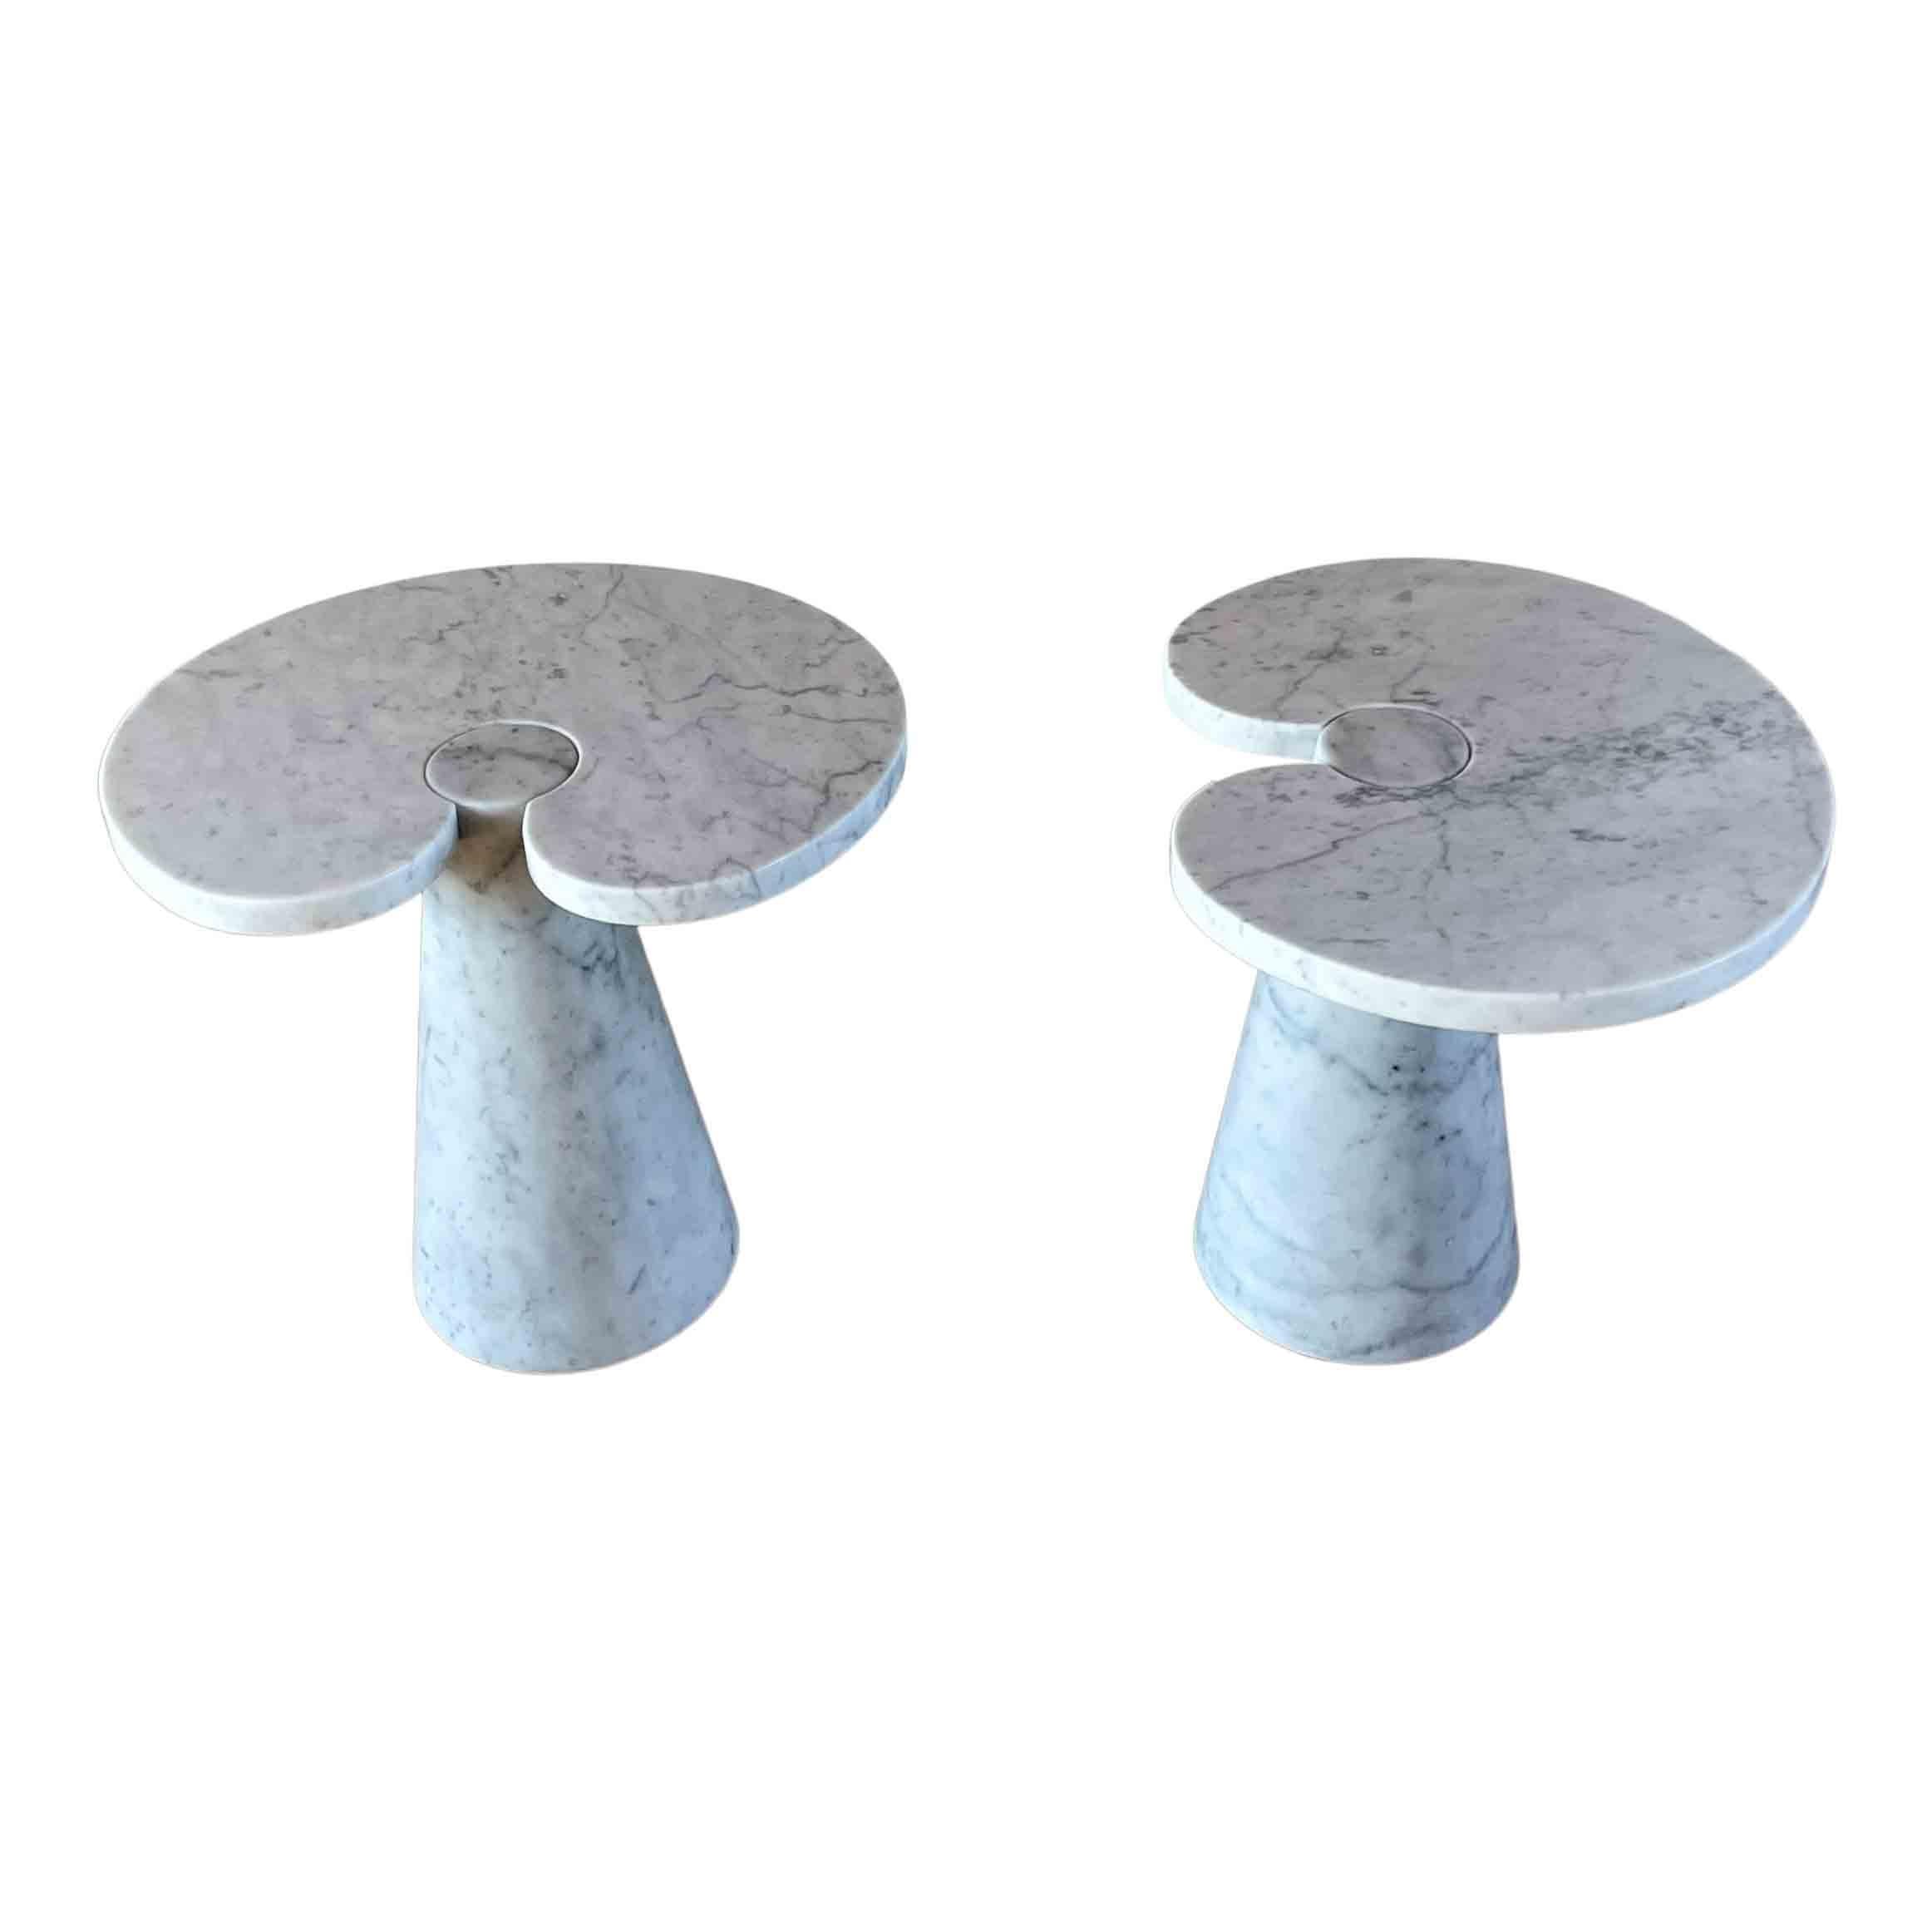 Angelo Mangiarotti Carrara Marble “Eros” Side Table for Skipper, 1971, Set of 2 In Good Condition For Sale In Vicenza, IT